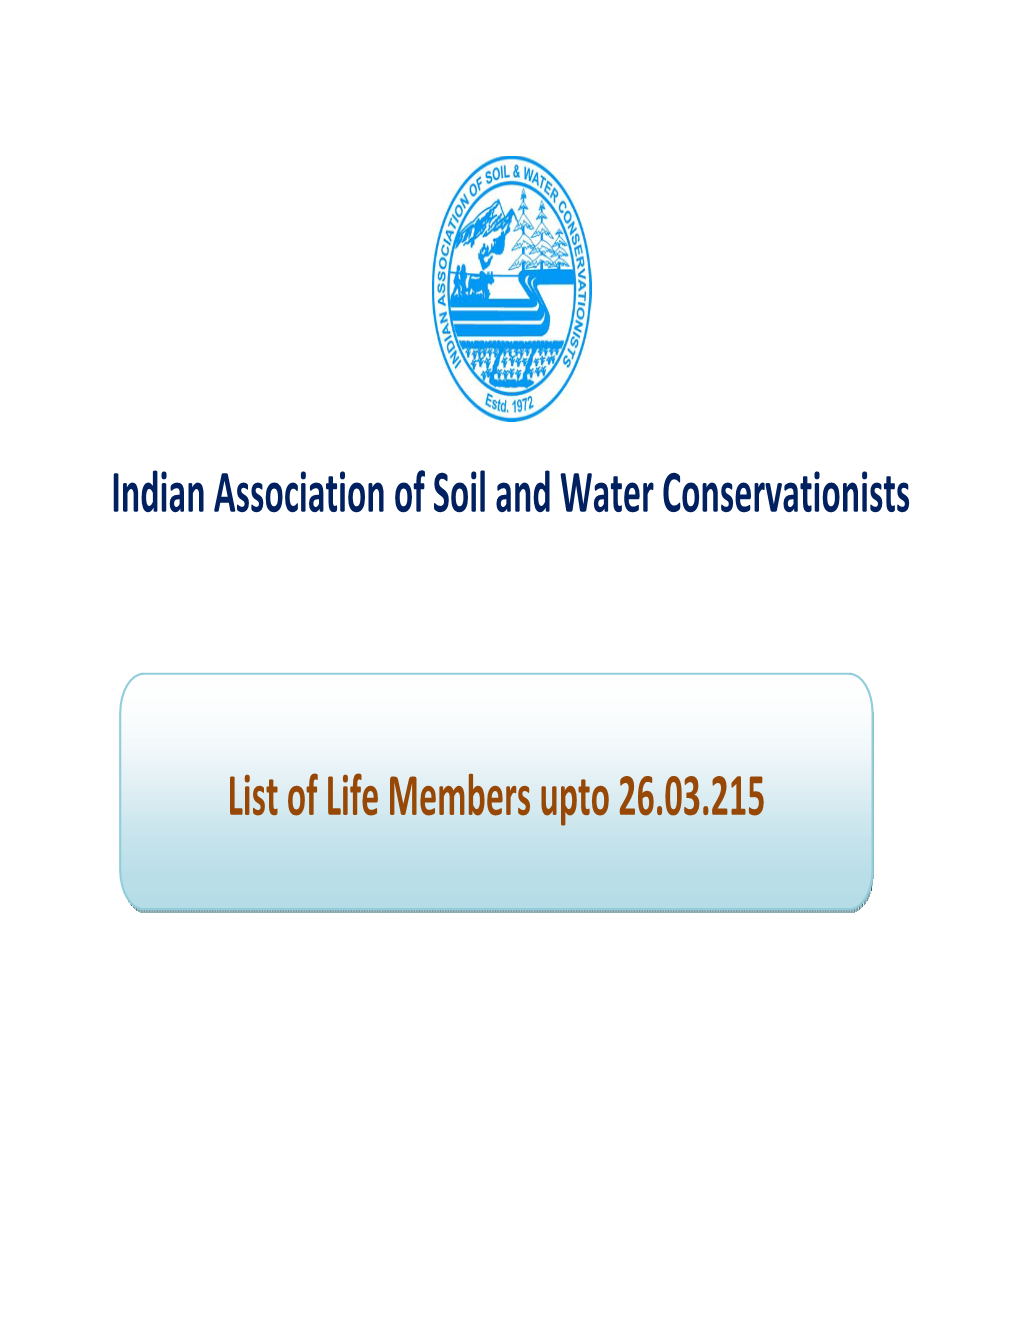 Indian Association of Soil and Water Conservationists List of Life